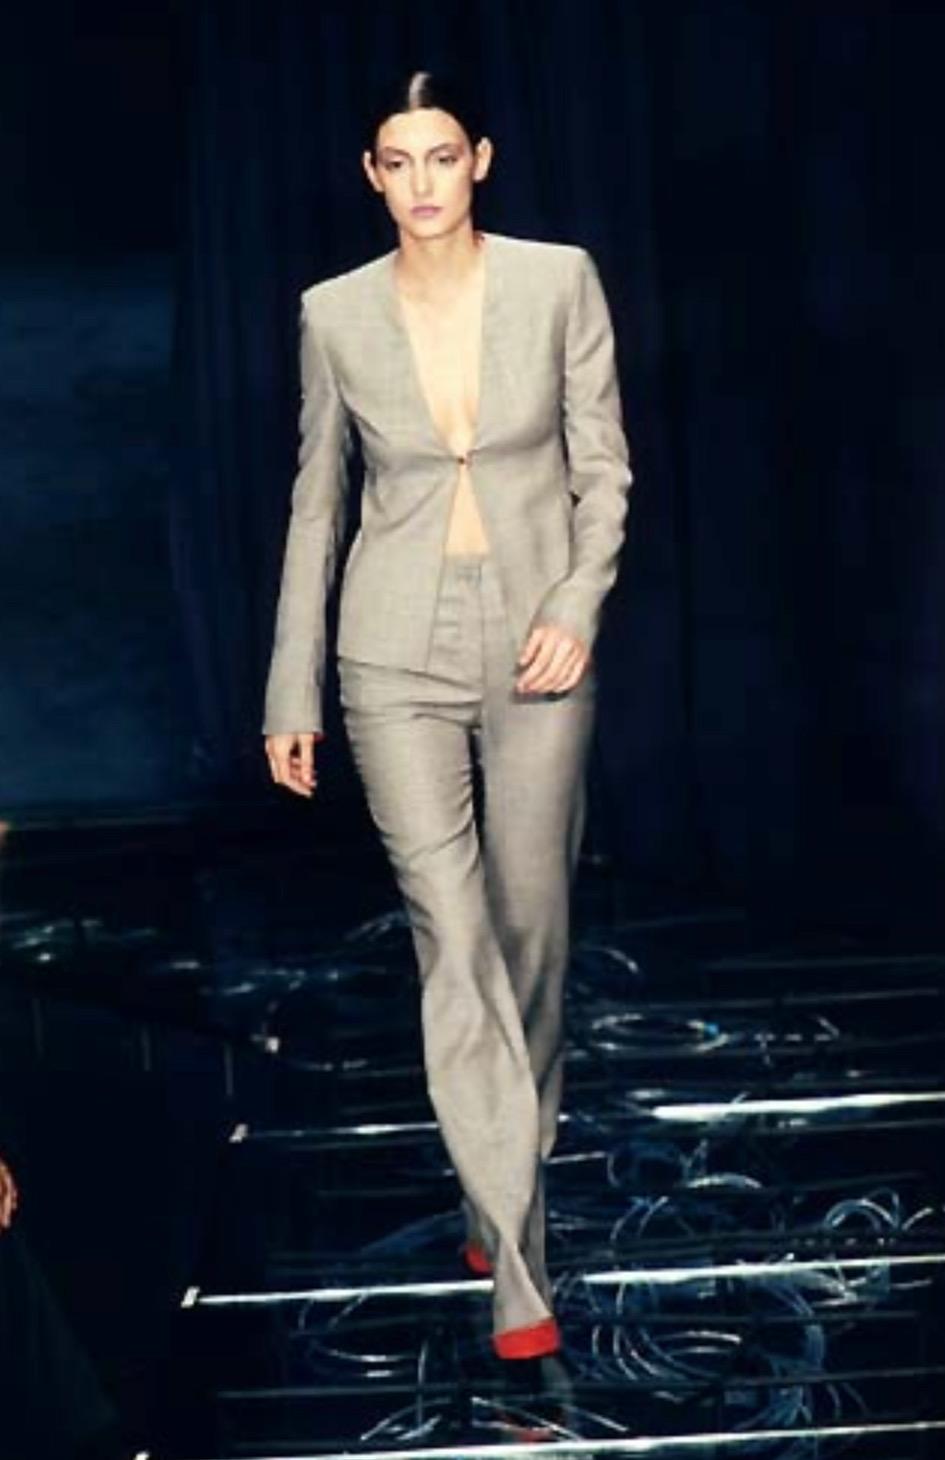 Presenting a fabulous grey houndstooth Gianni Versace tunic suit designed by Donatella Versace. From the Spring/Summer 1998 collection, a similar open-front jacket debuted on the season's runway. This fabulous set is comprised of a tunic-style coat